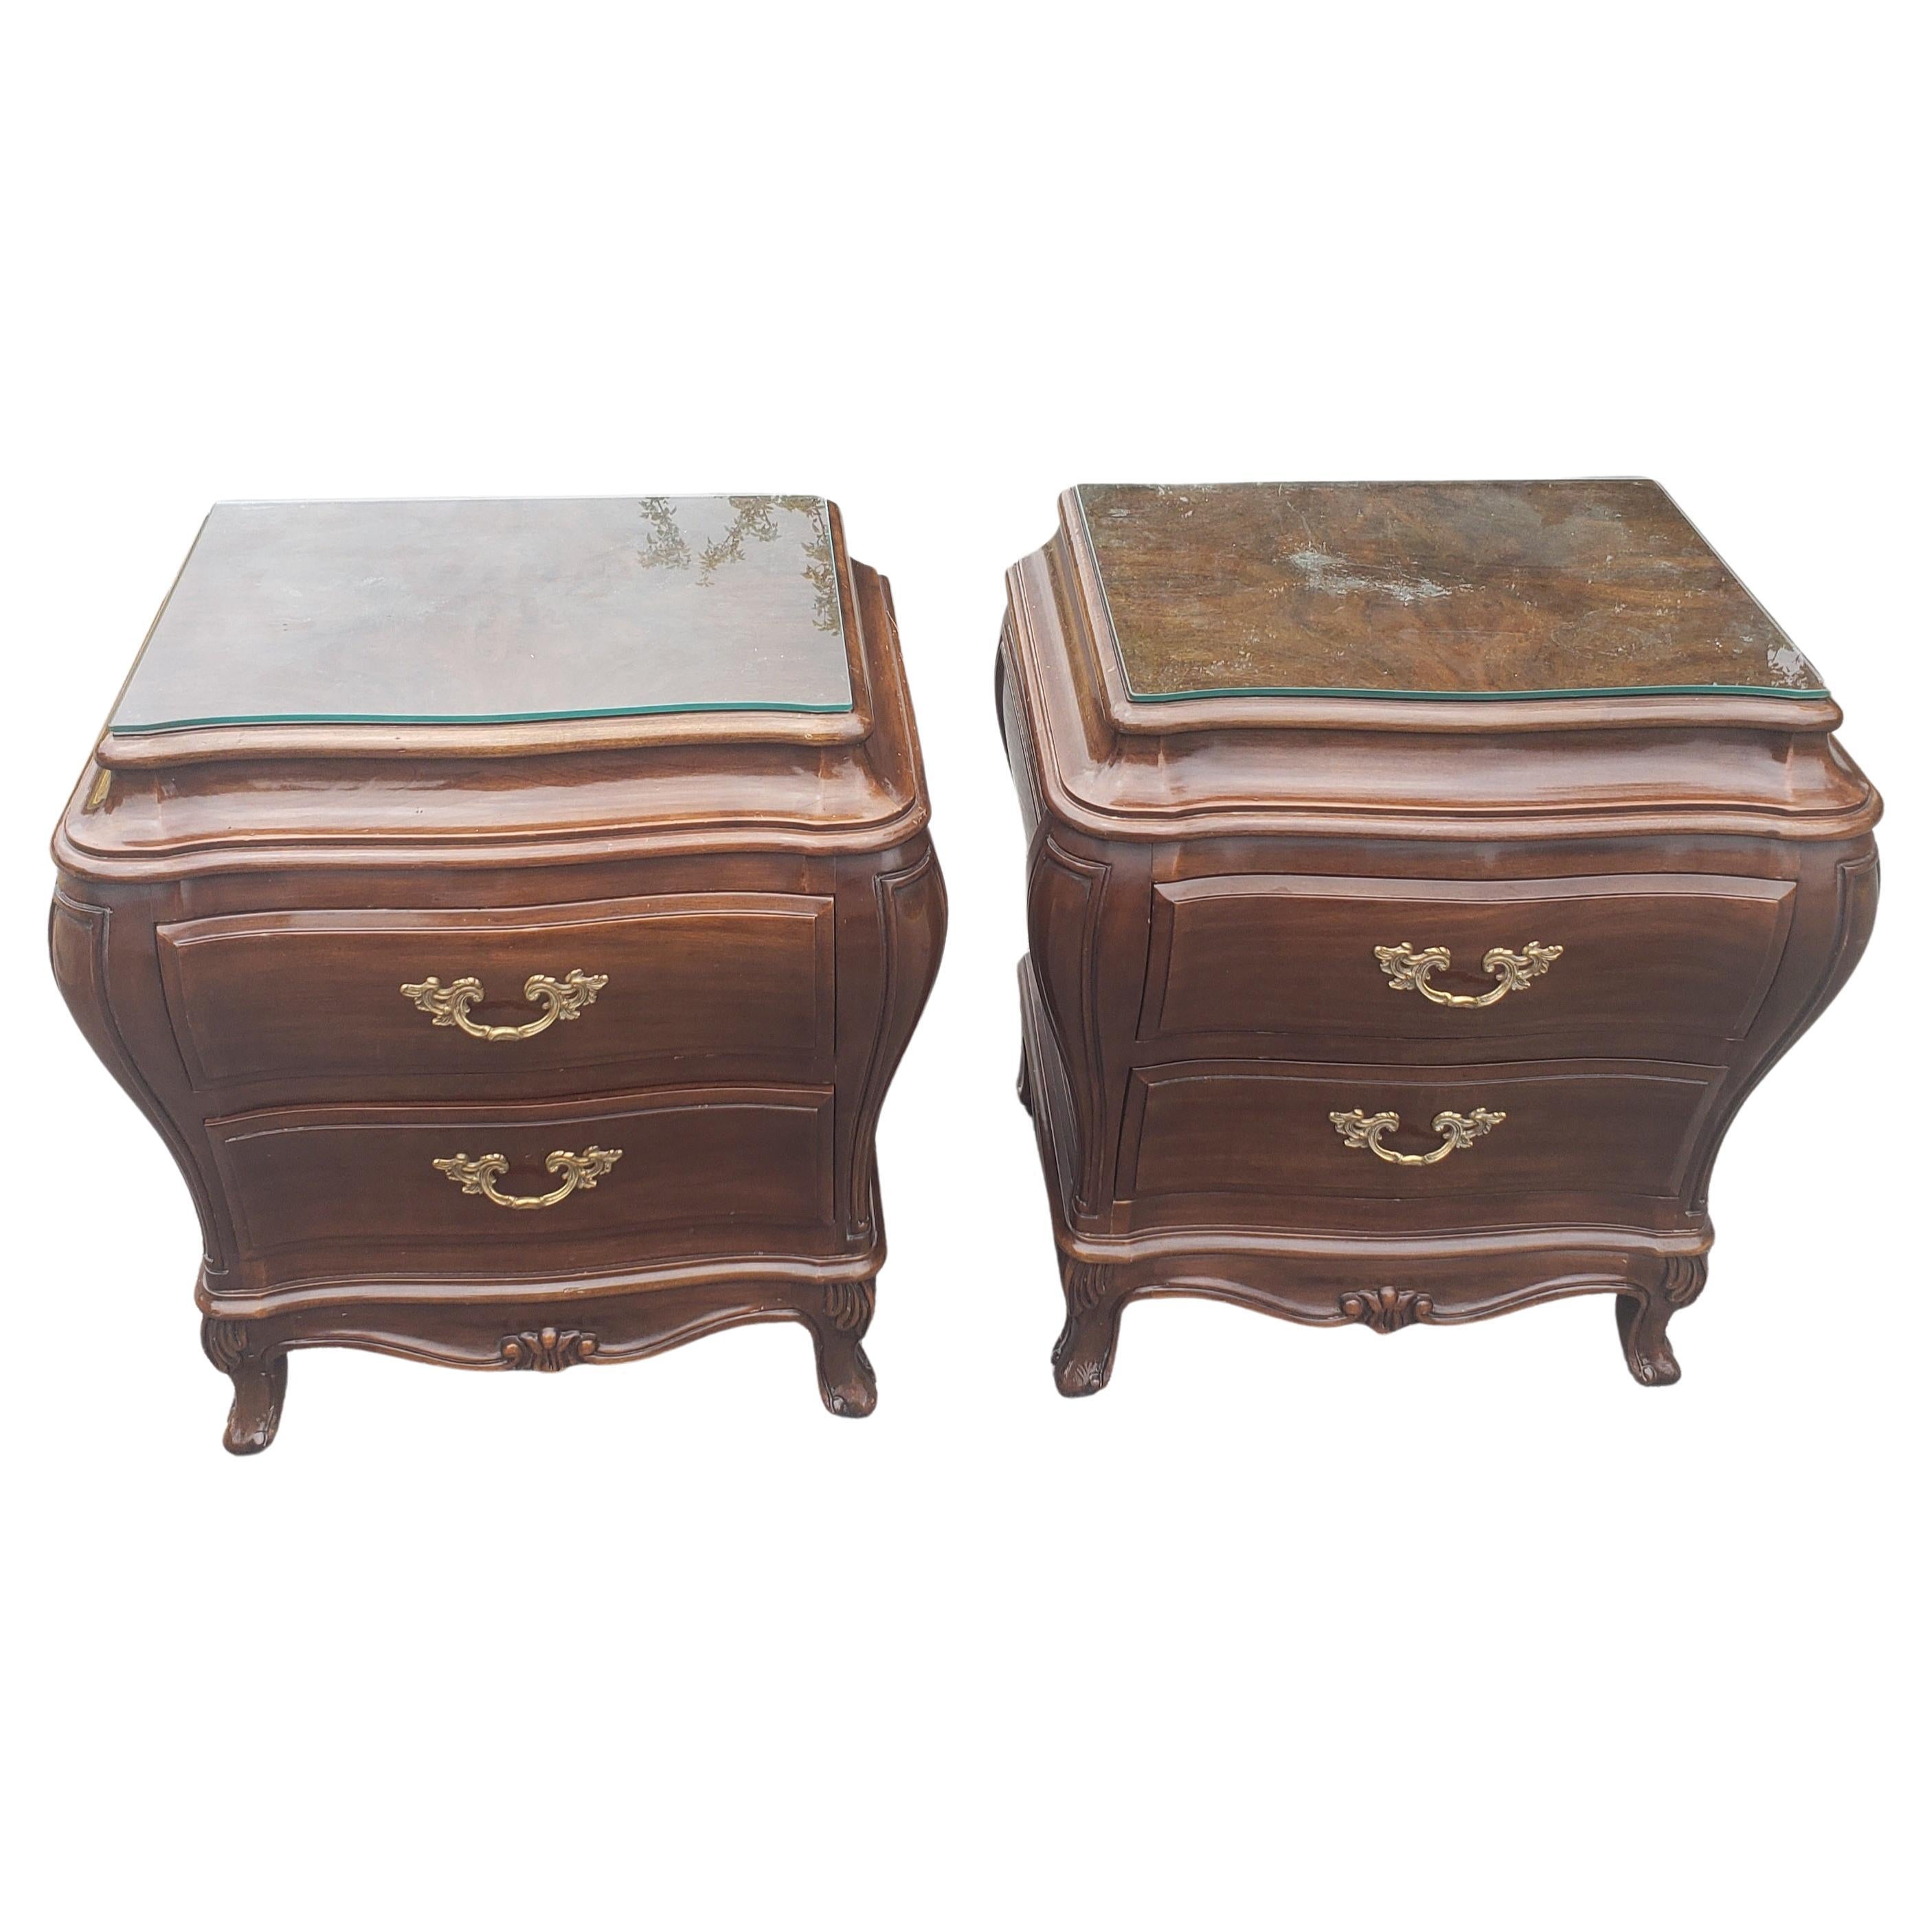 Woodwork Karges Furniture Louis XVI Mahogany Bombe Nightstands Commodes, a Pair For Sale